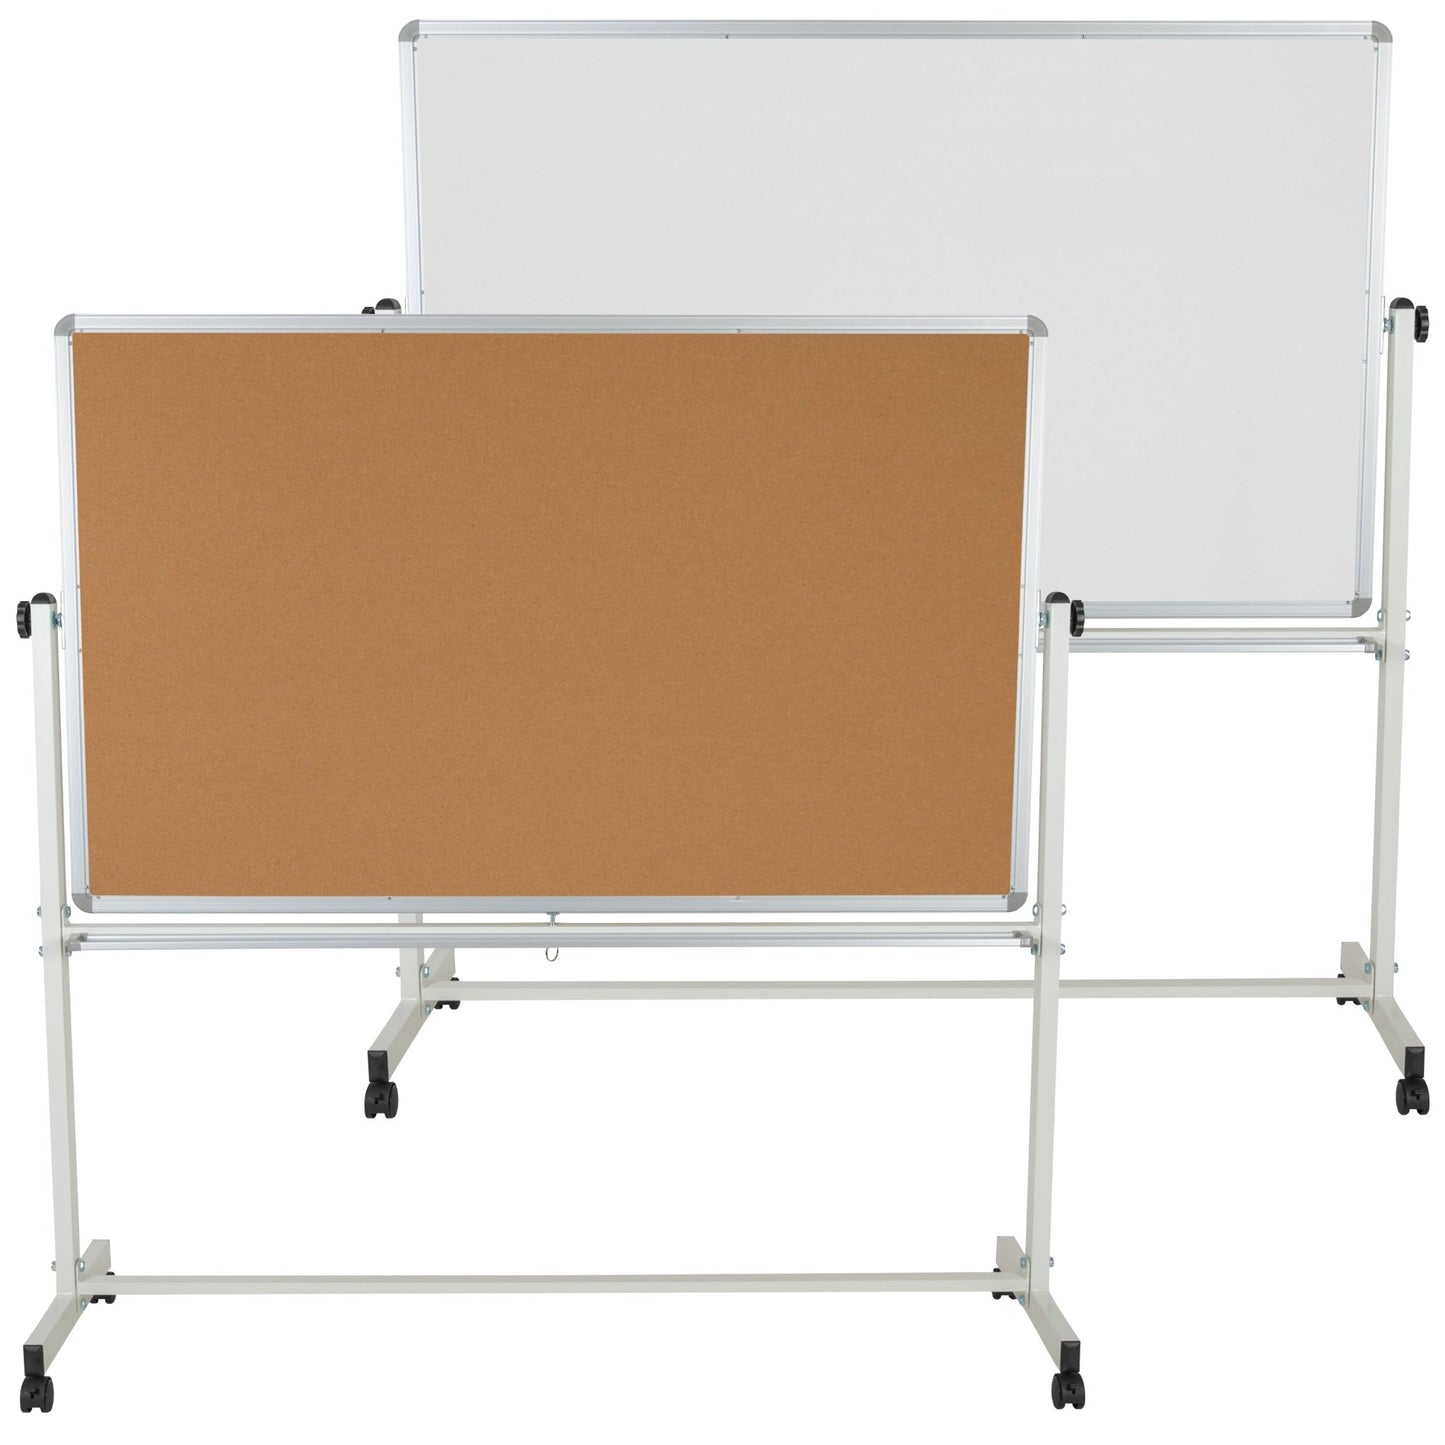 HERCULES Series 64.25"W x 64.75"H Reversible Mobile Cork Bulletin Board and White Board with Pen Tray - SchoolOutlet